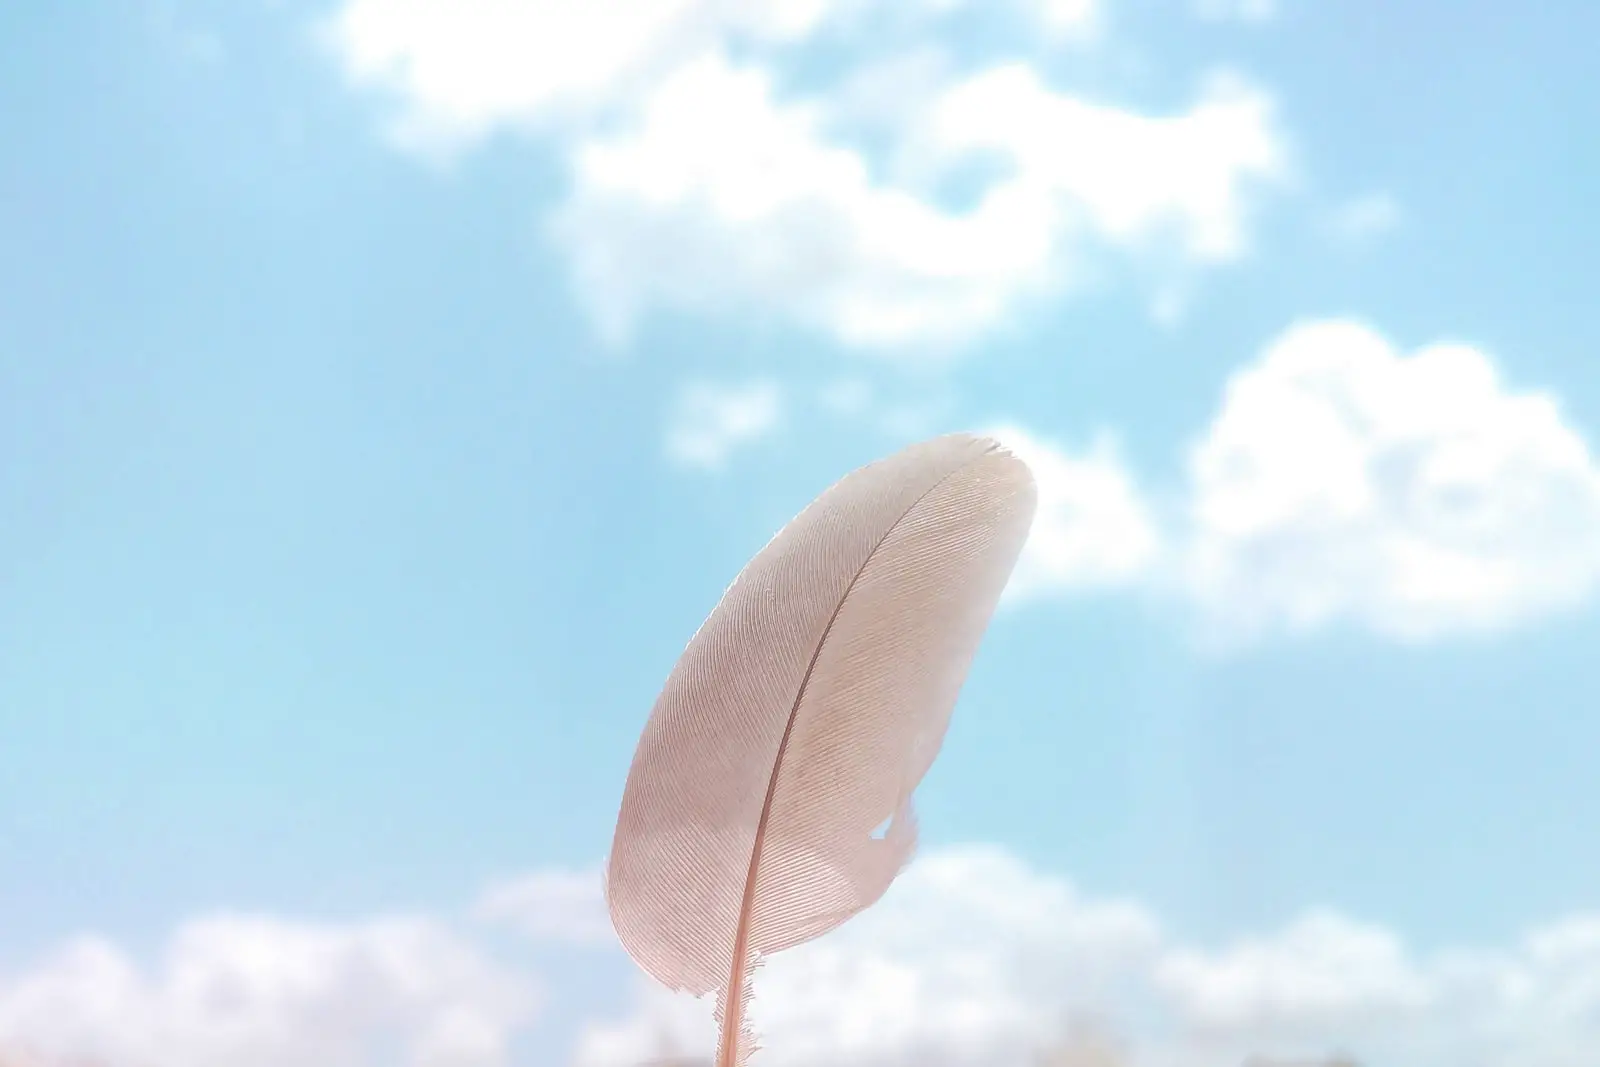 white feather under blue sky during daytime